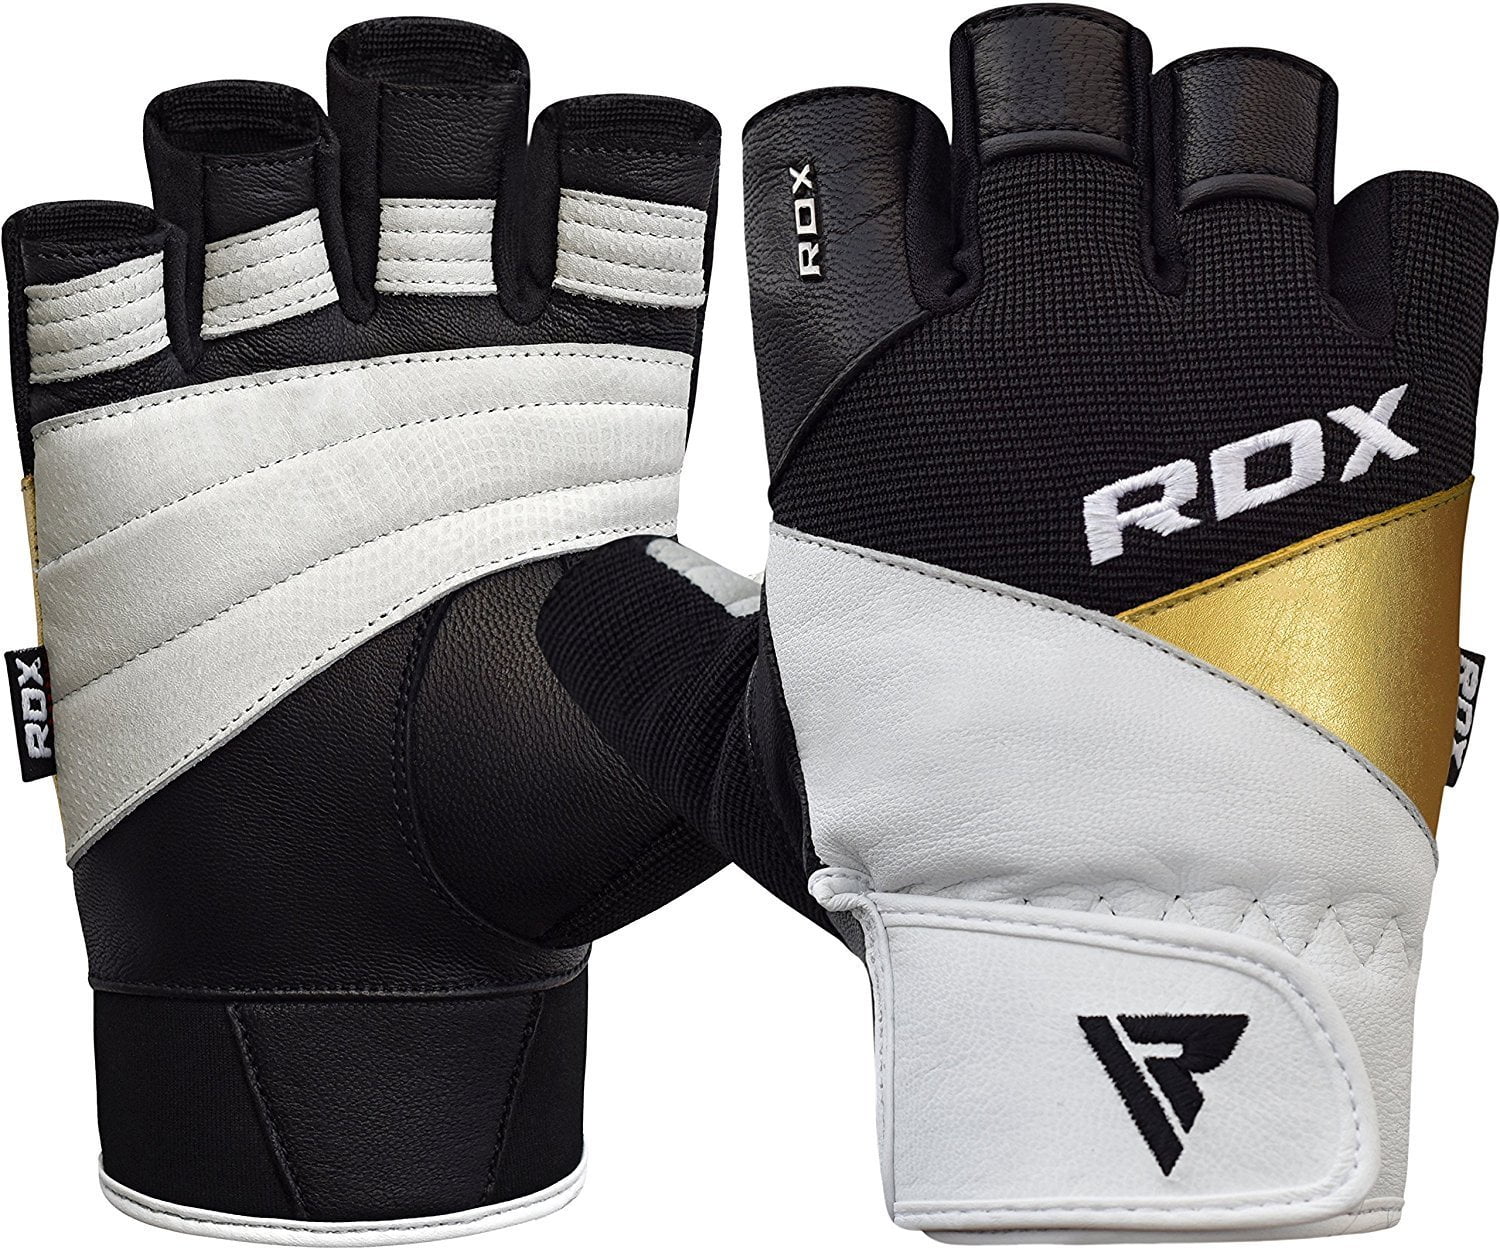 RDX Leather Gym Weight Lifting Gloves Workout Fitness Bodybuilding Powerlifting 